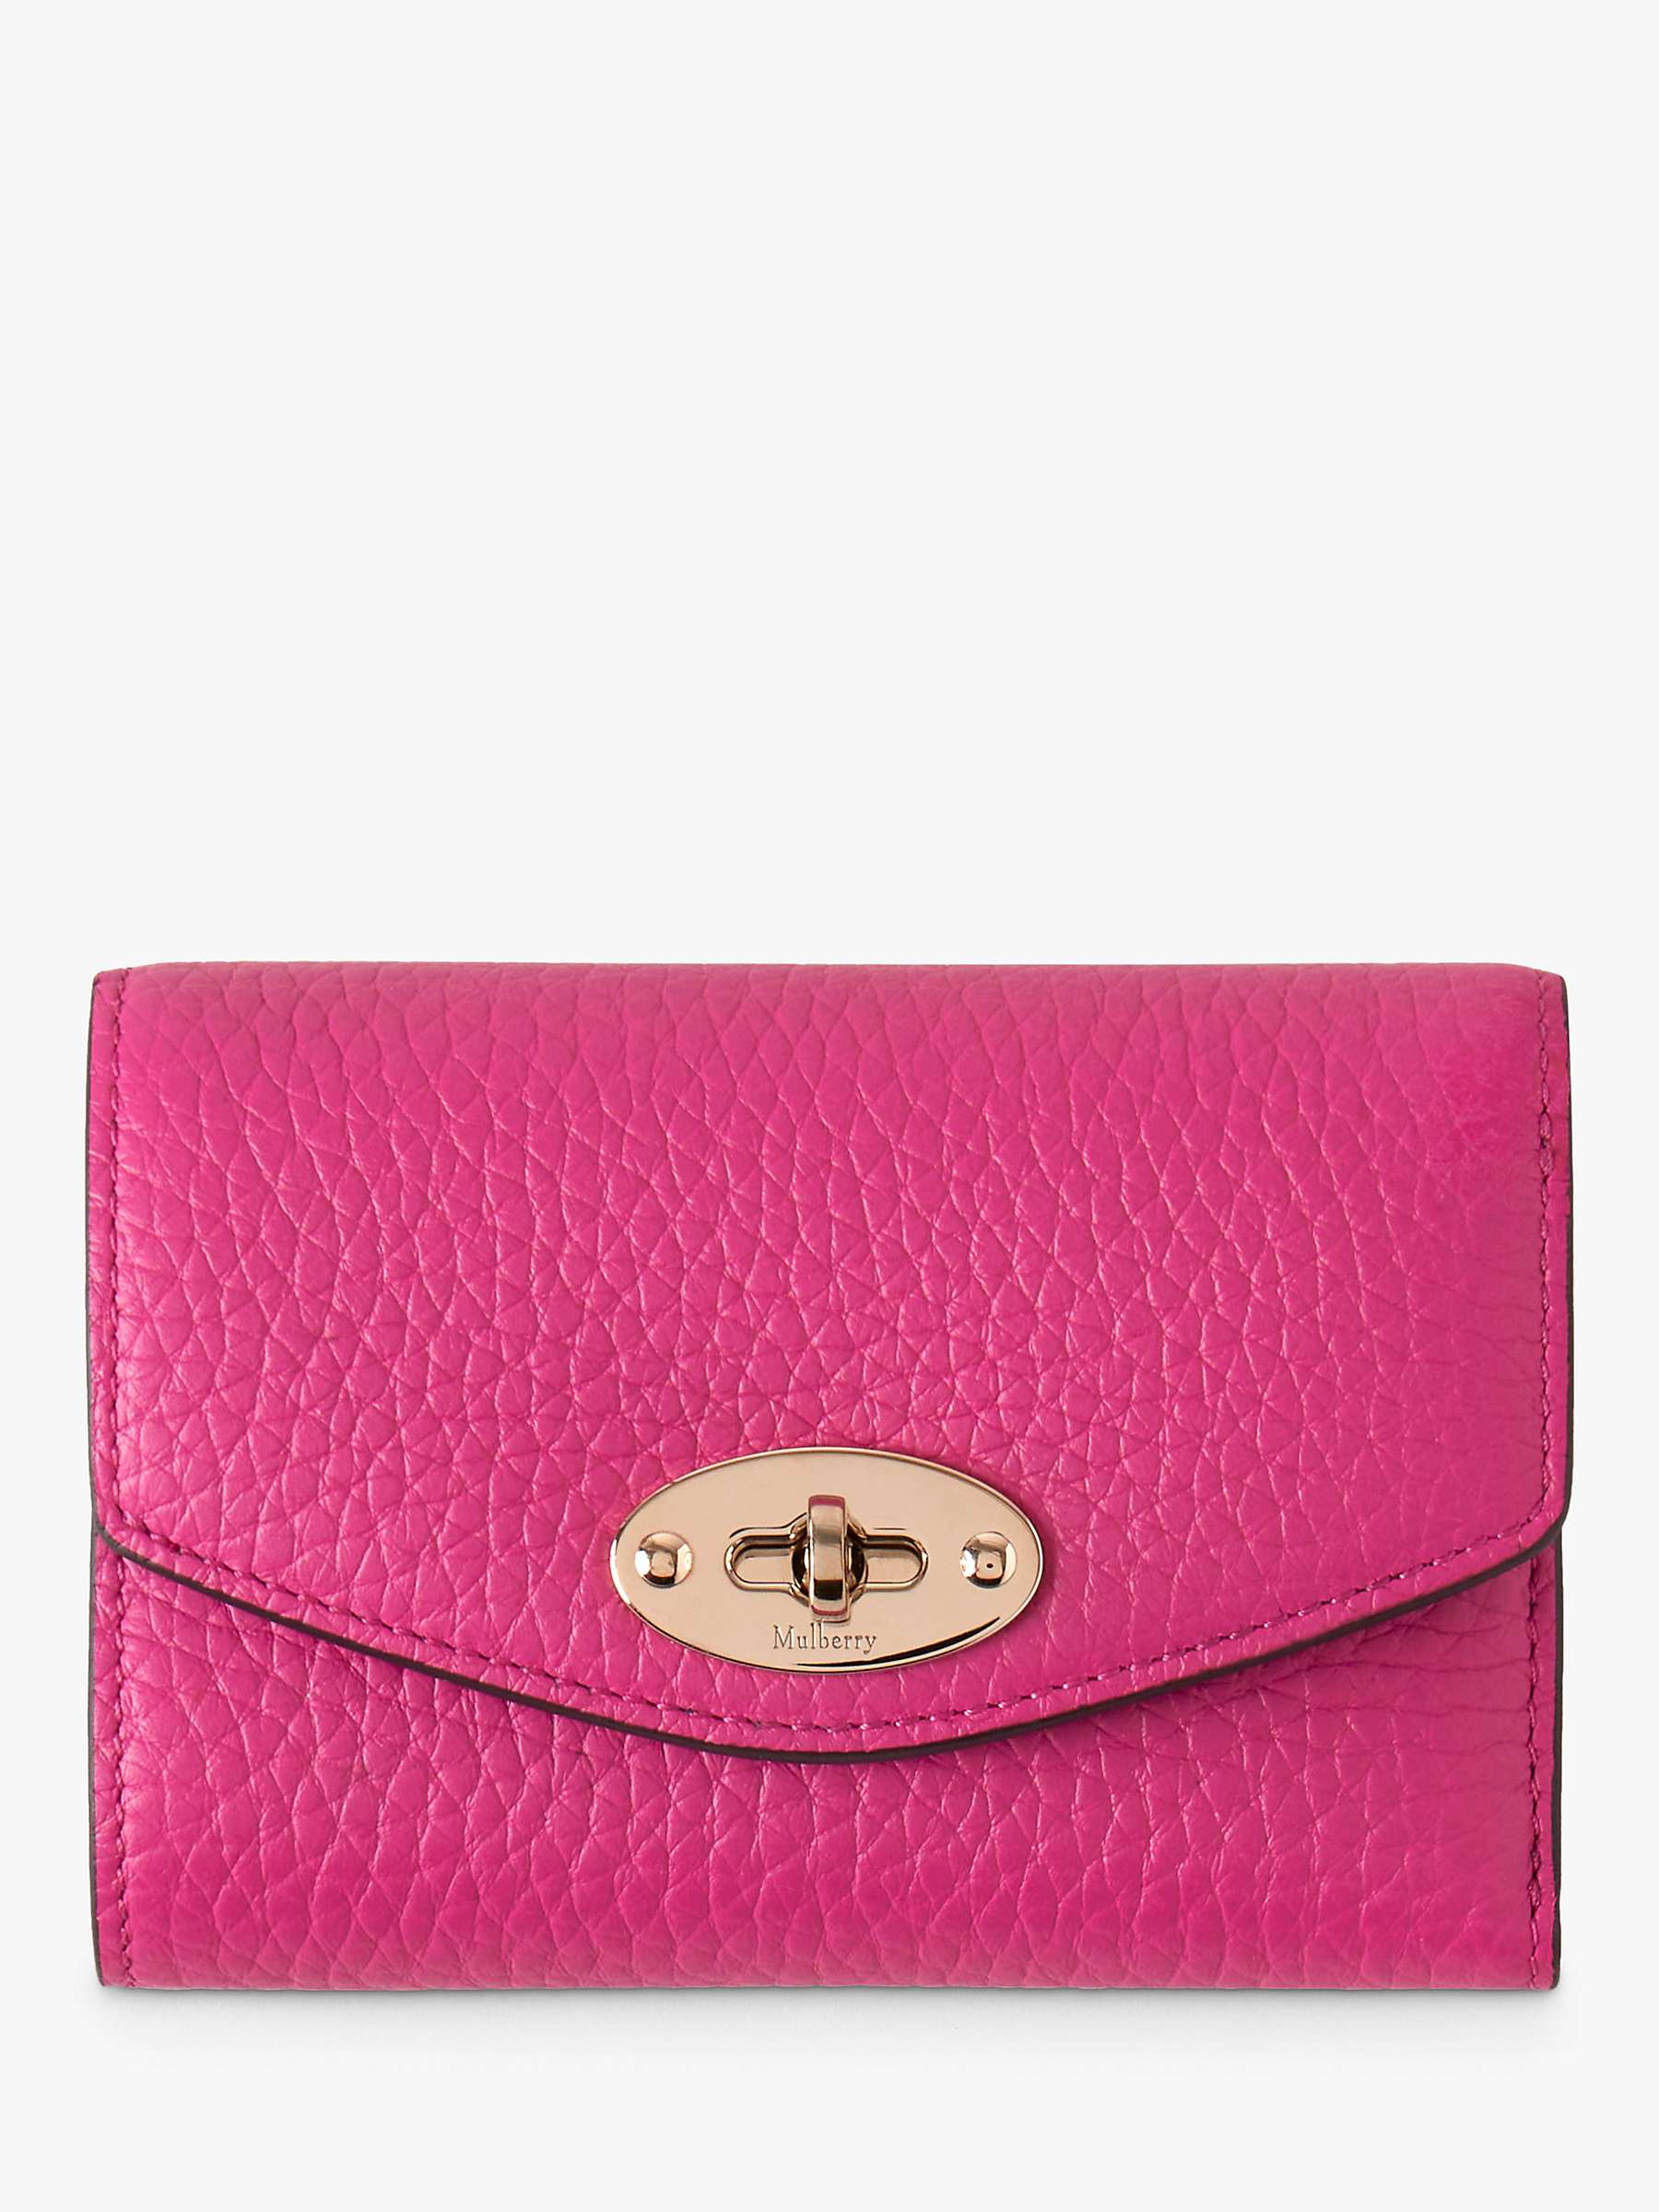 Buy Mulberry Darley Heavy Grain Leather Folded Multi-Card Wallet Online at johnlewis.com